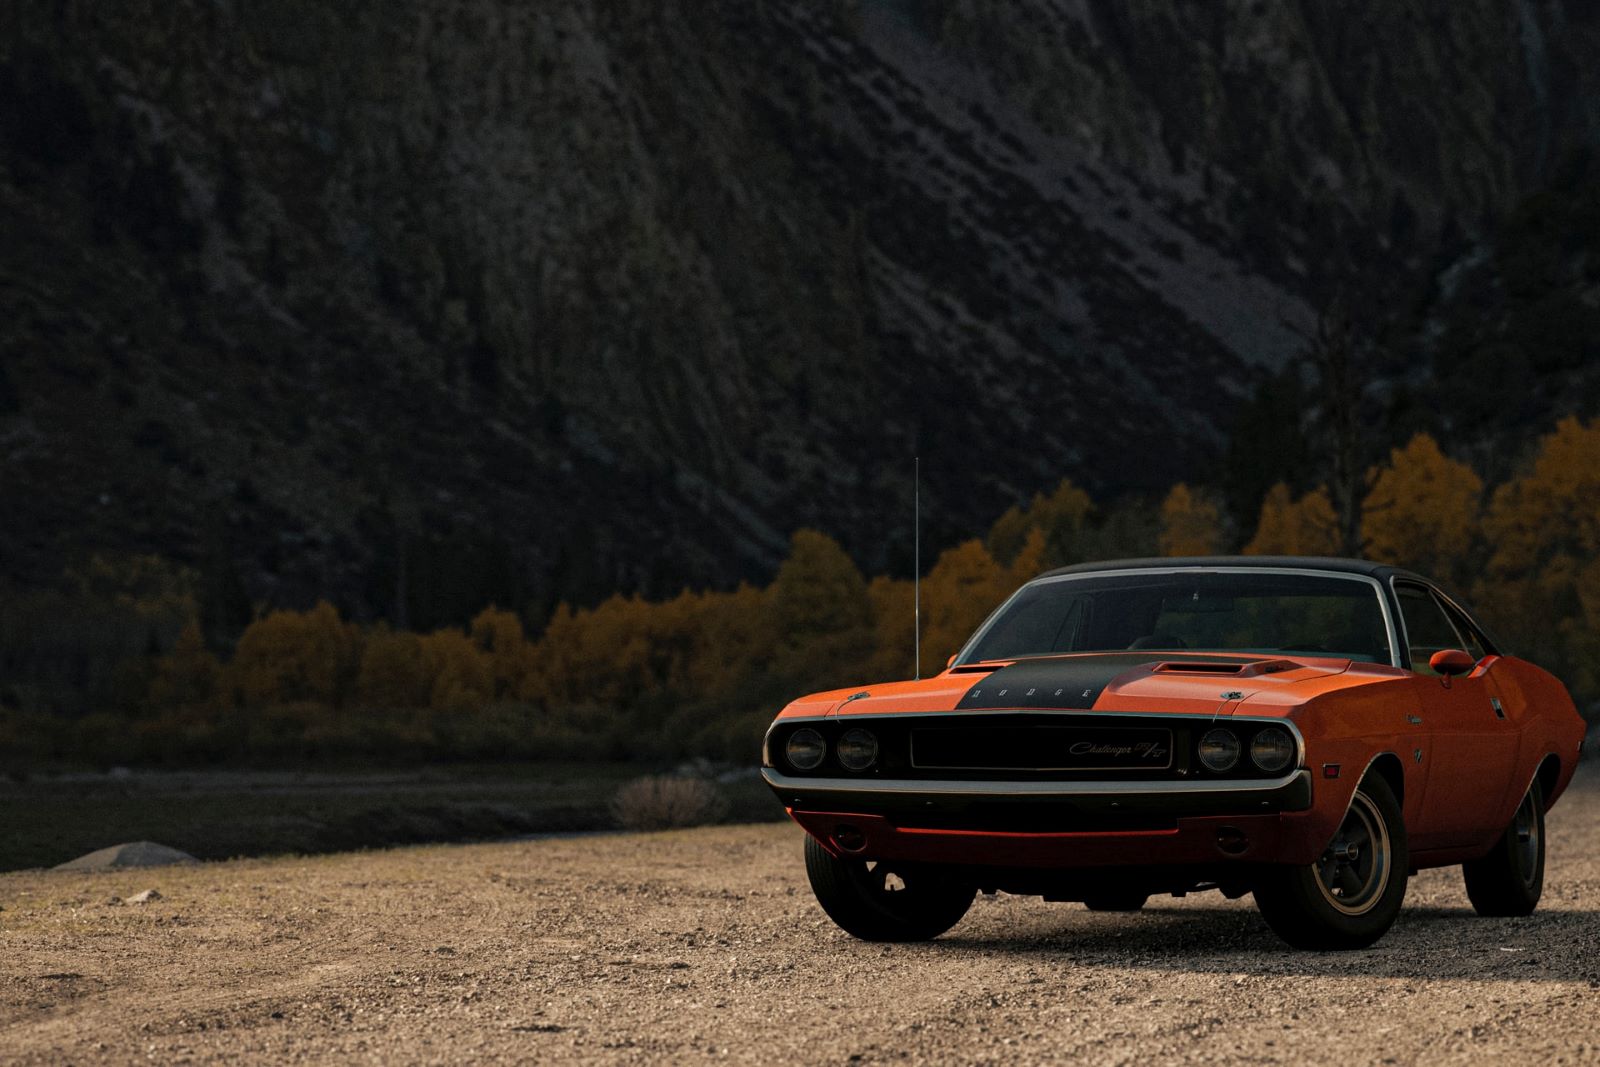 Vintage 70s Dodge Charger, one of the best American muscle cars